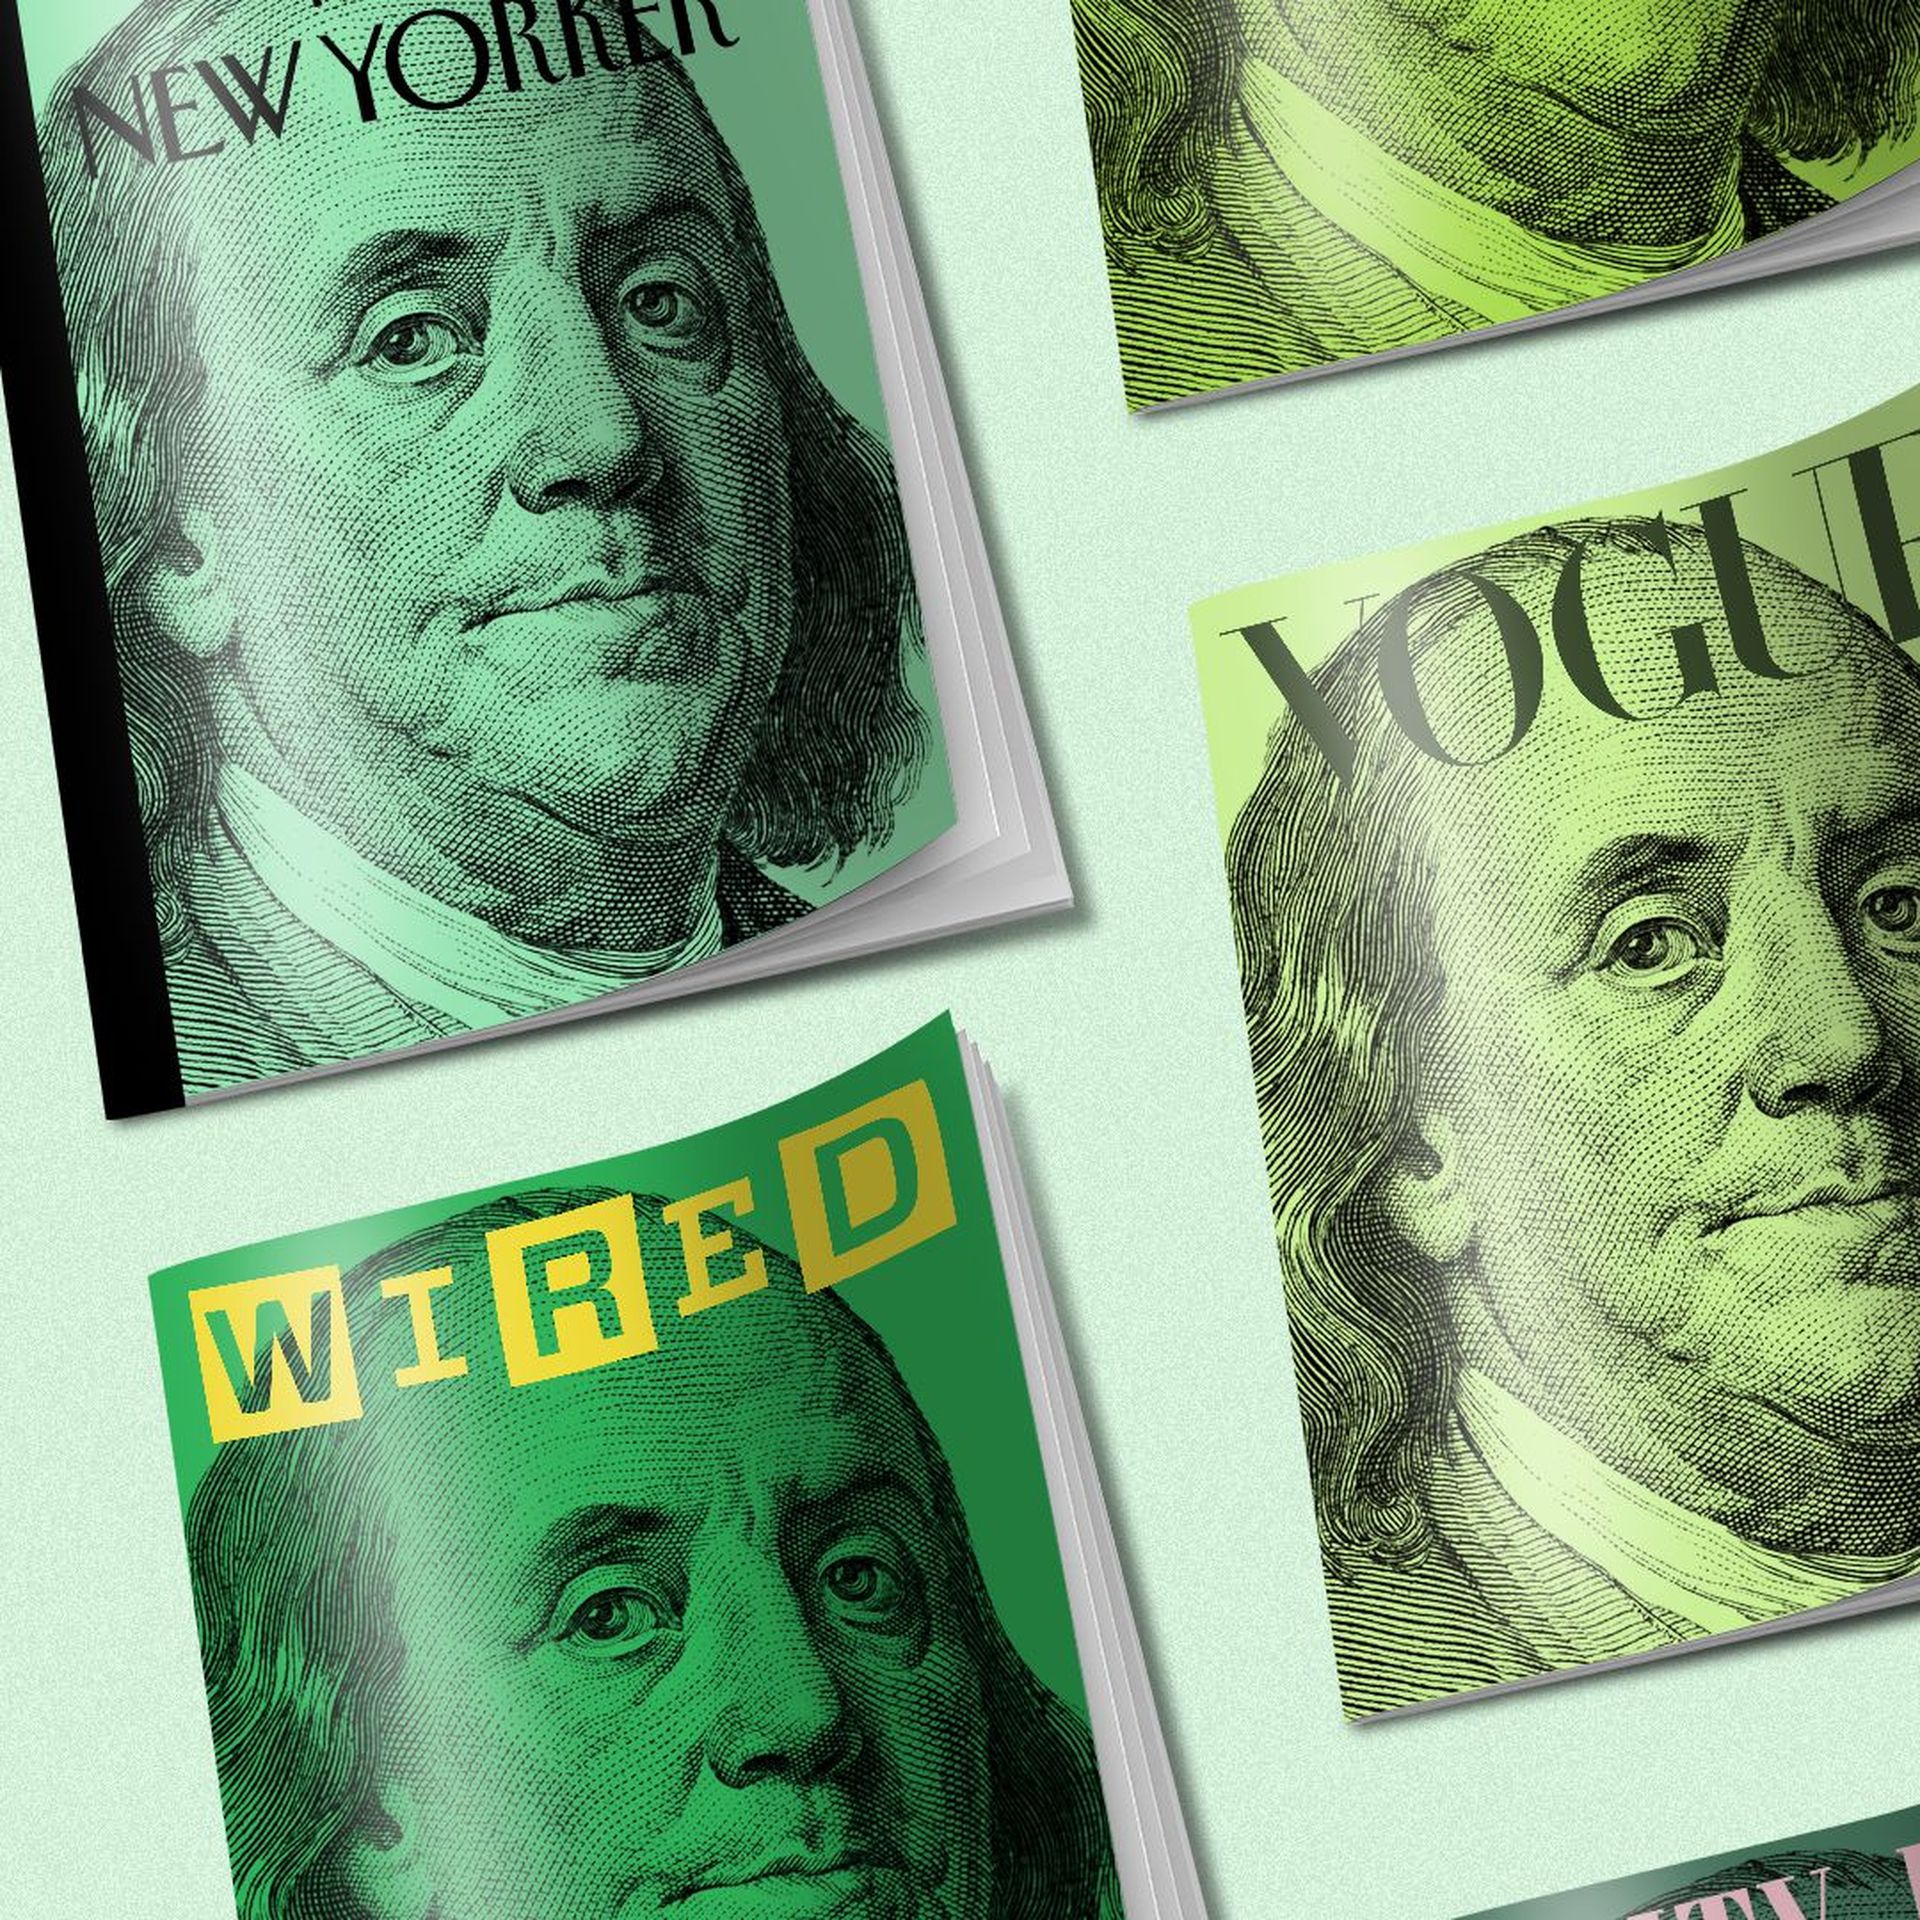 Illustration of Condé Nast magazines with Ben Franklin on the cover